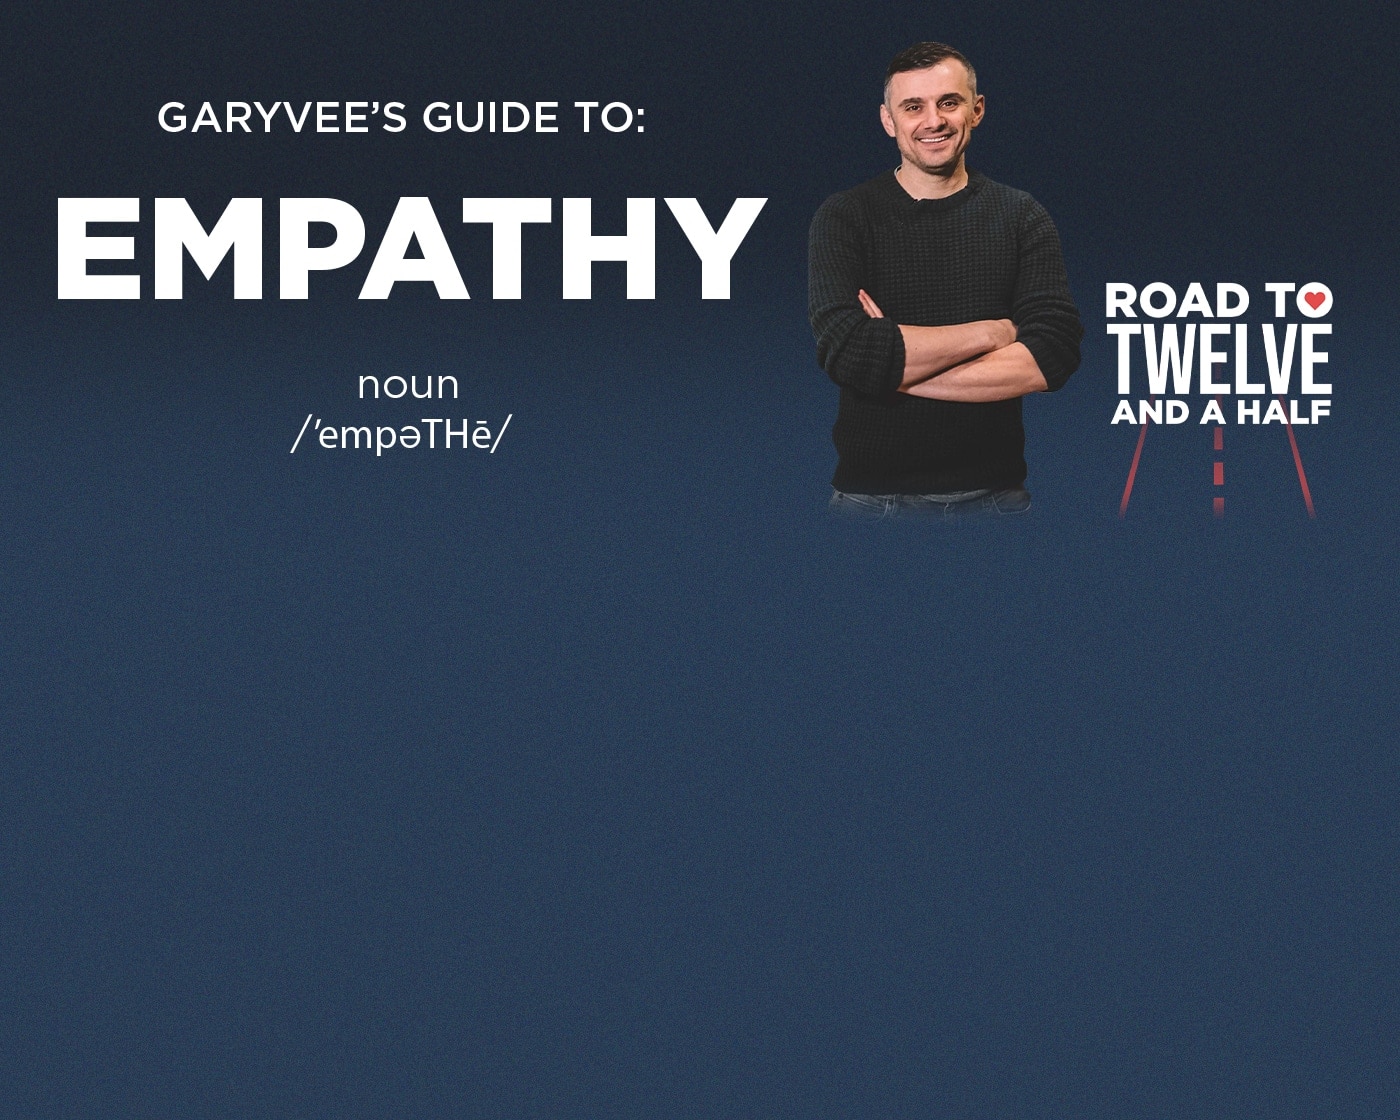 Road to Twelve and a Half: Empathy